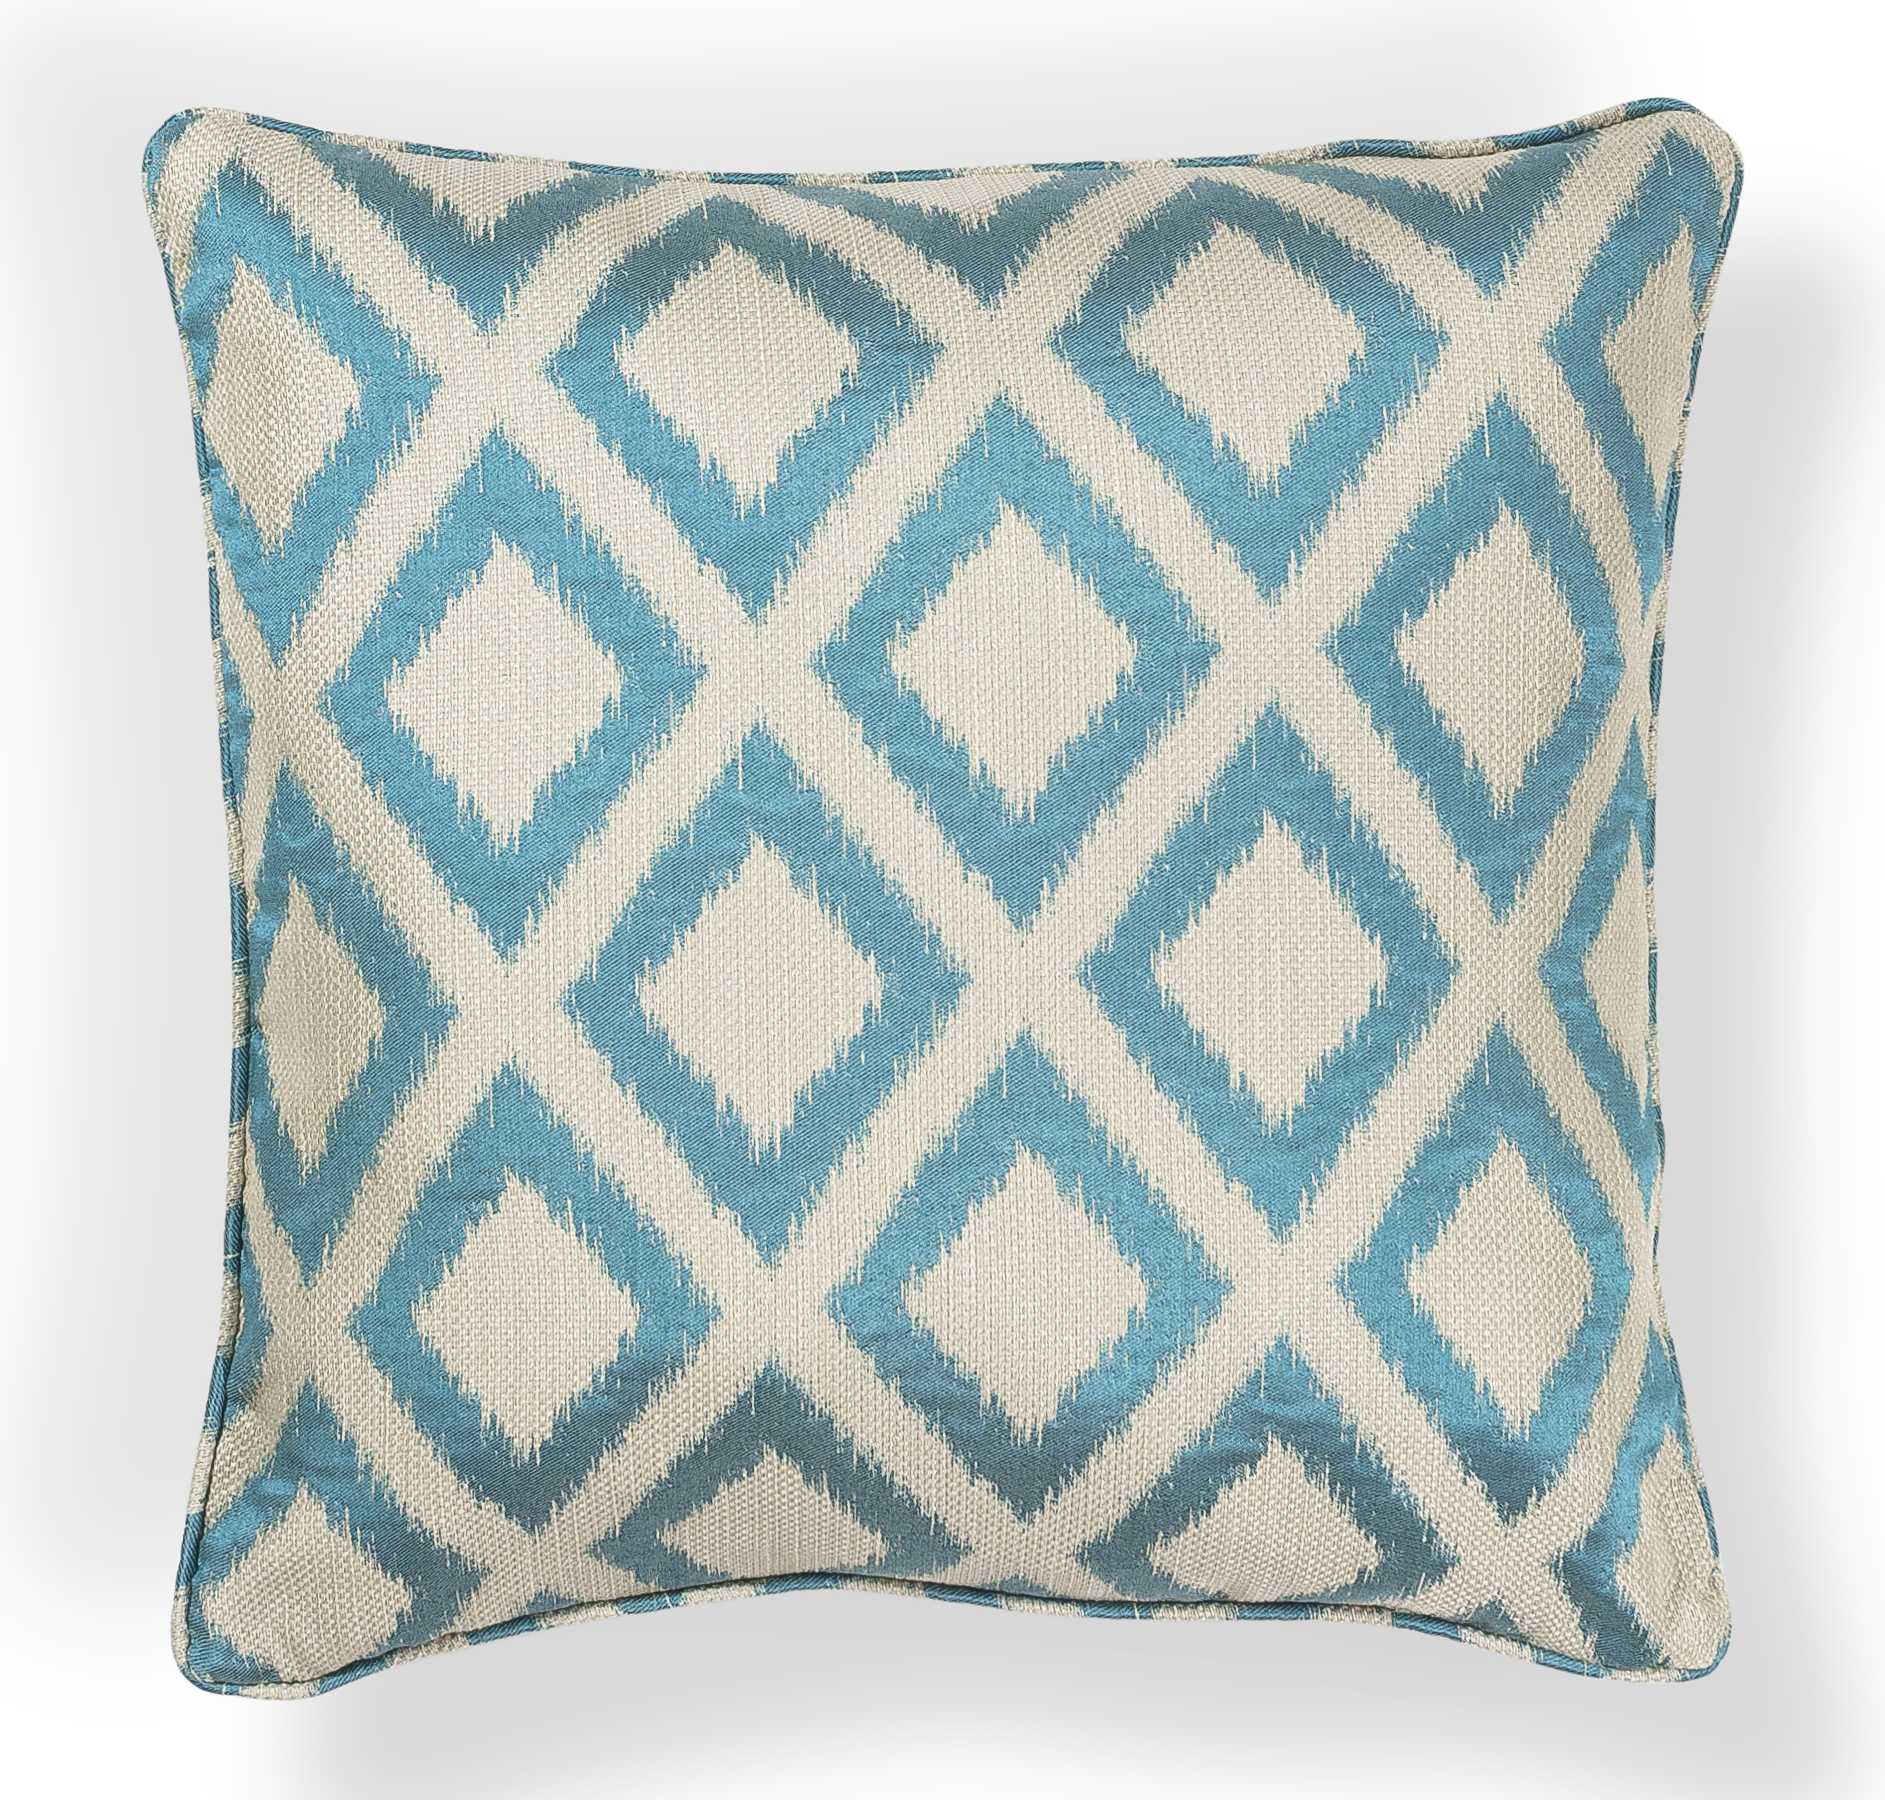 Elegant Square Turquoise and Silver Gray Accent Pillow